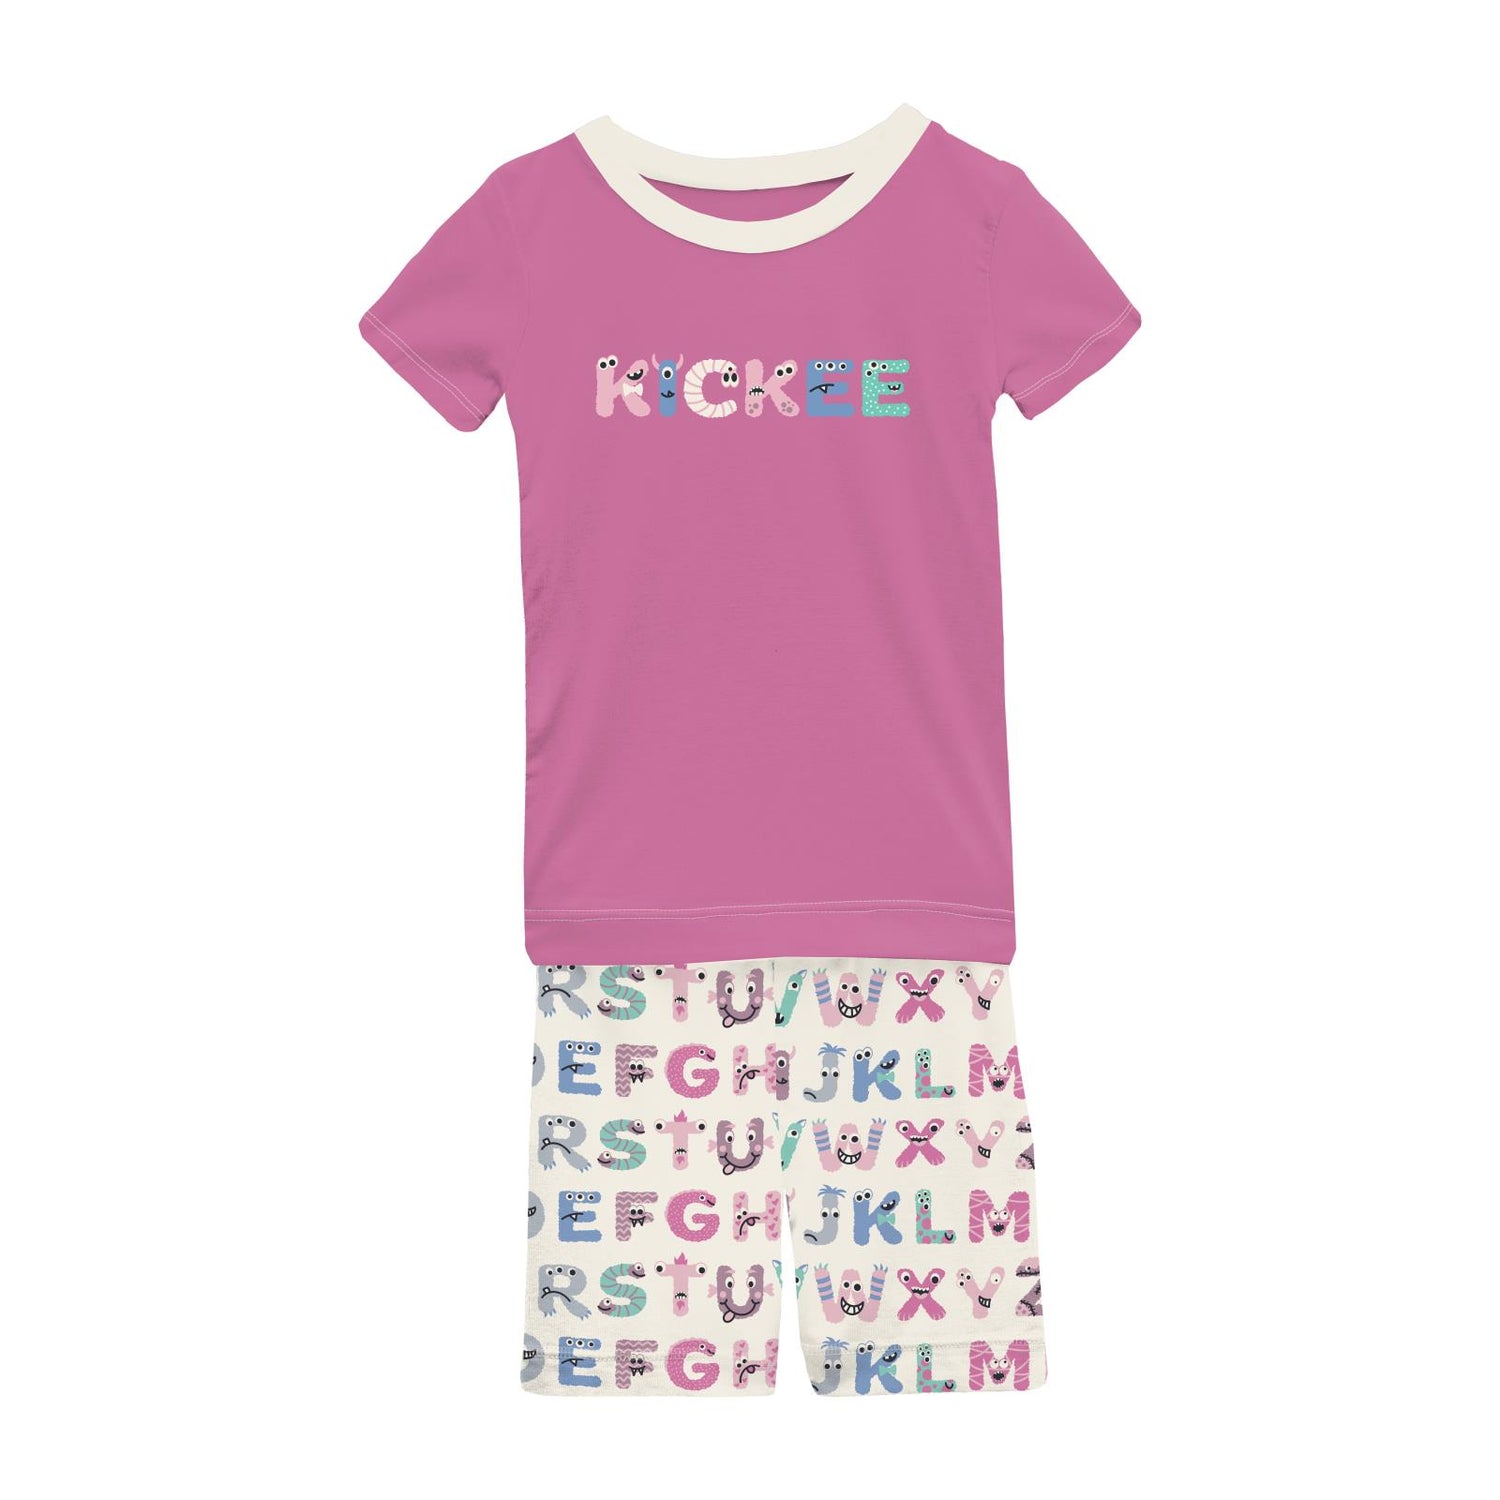 Short Sleeve Graphic Tee Pajama Set with Shorts in Natural ABC Monsters